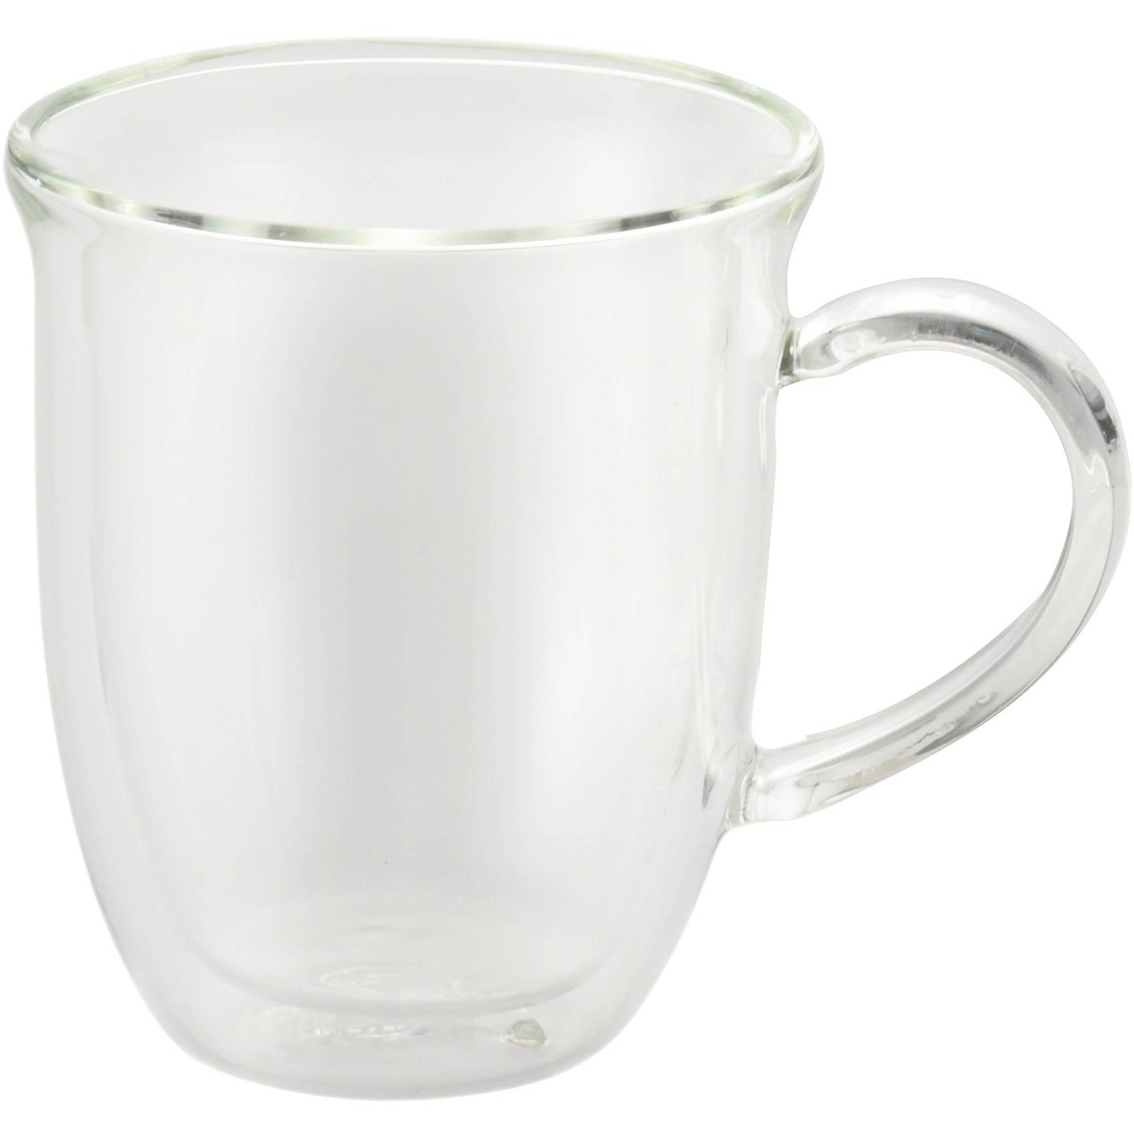 BonJour Coffee Insulated Borosilicate Glass Cappuccino Cup 2 pk. - Image 2 of 3